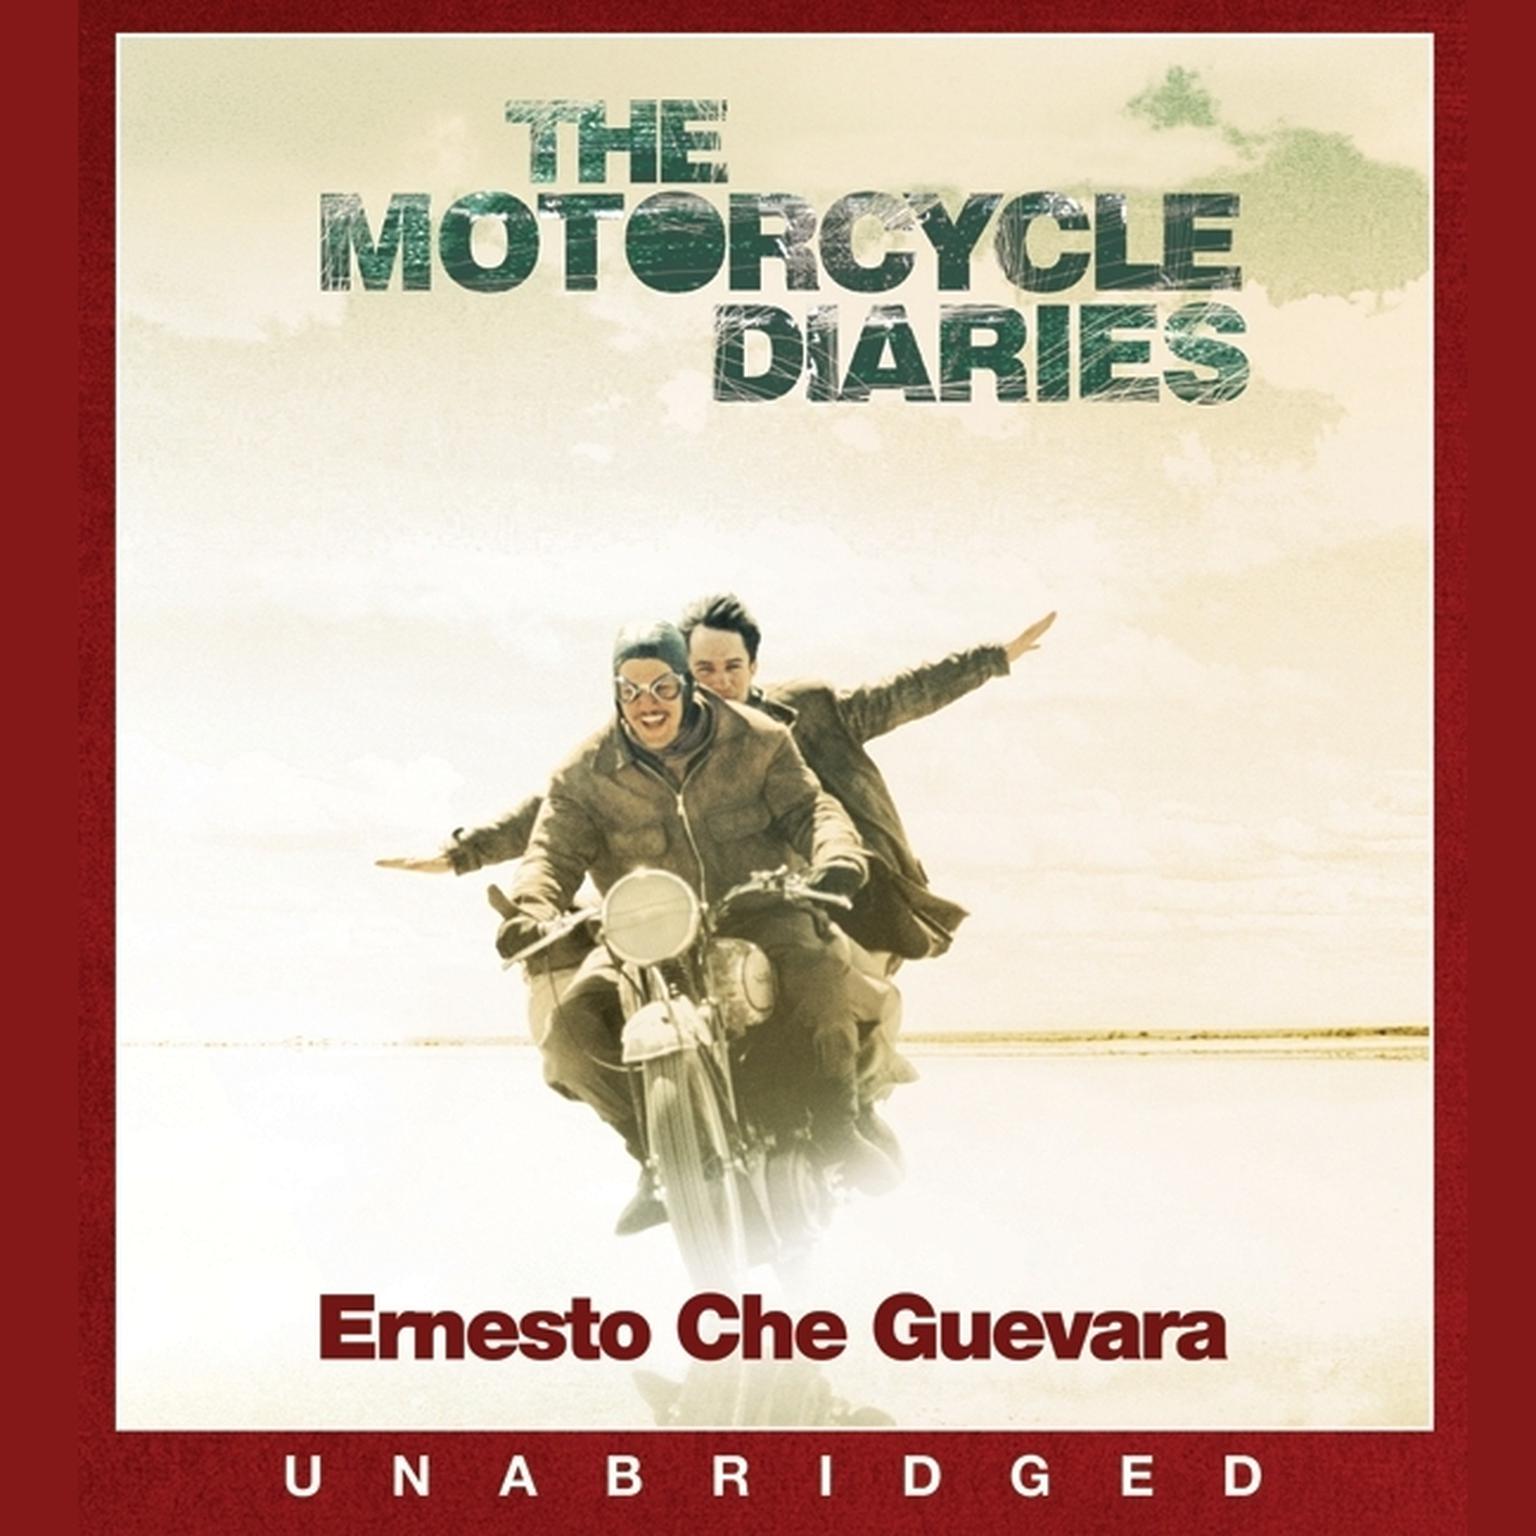 the motorcycle diaries analysis discovery